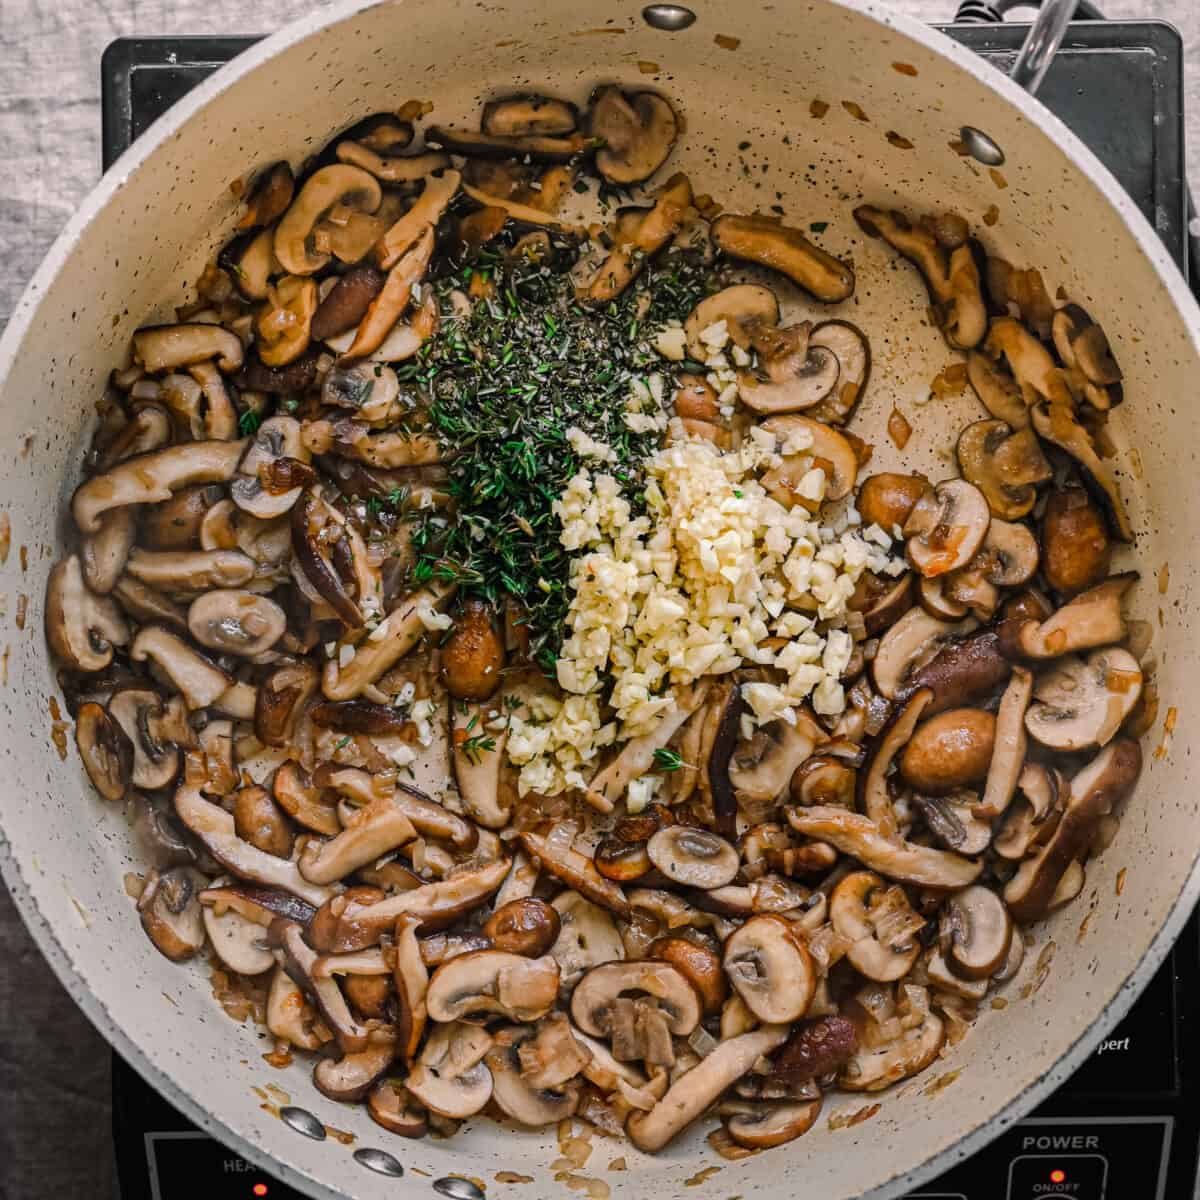 garlic, thyme, and rosemary added to sauteed mushrooms in skillet